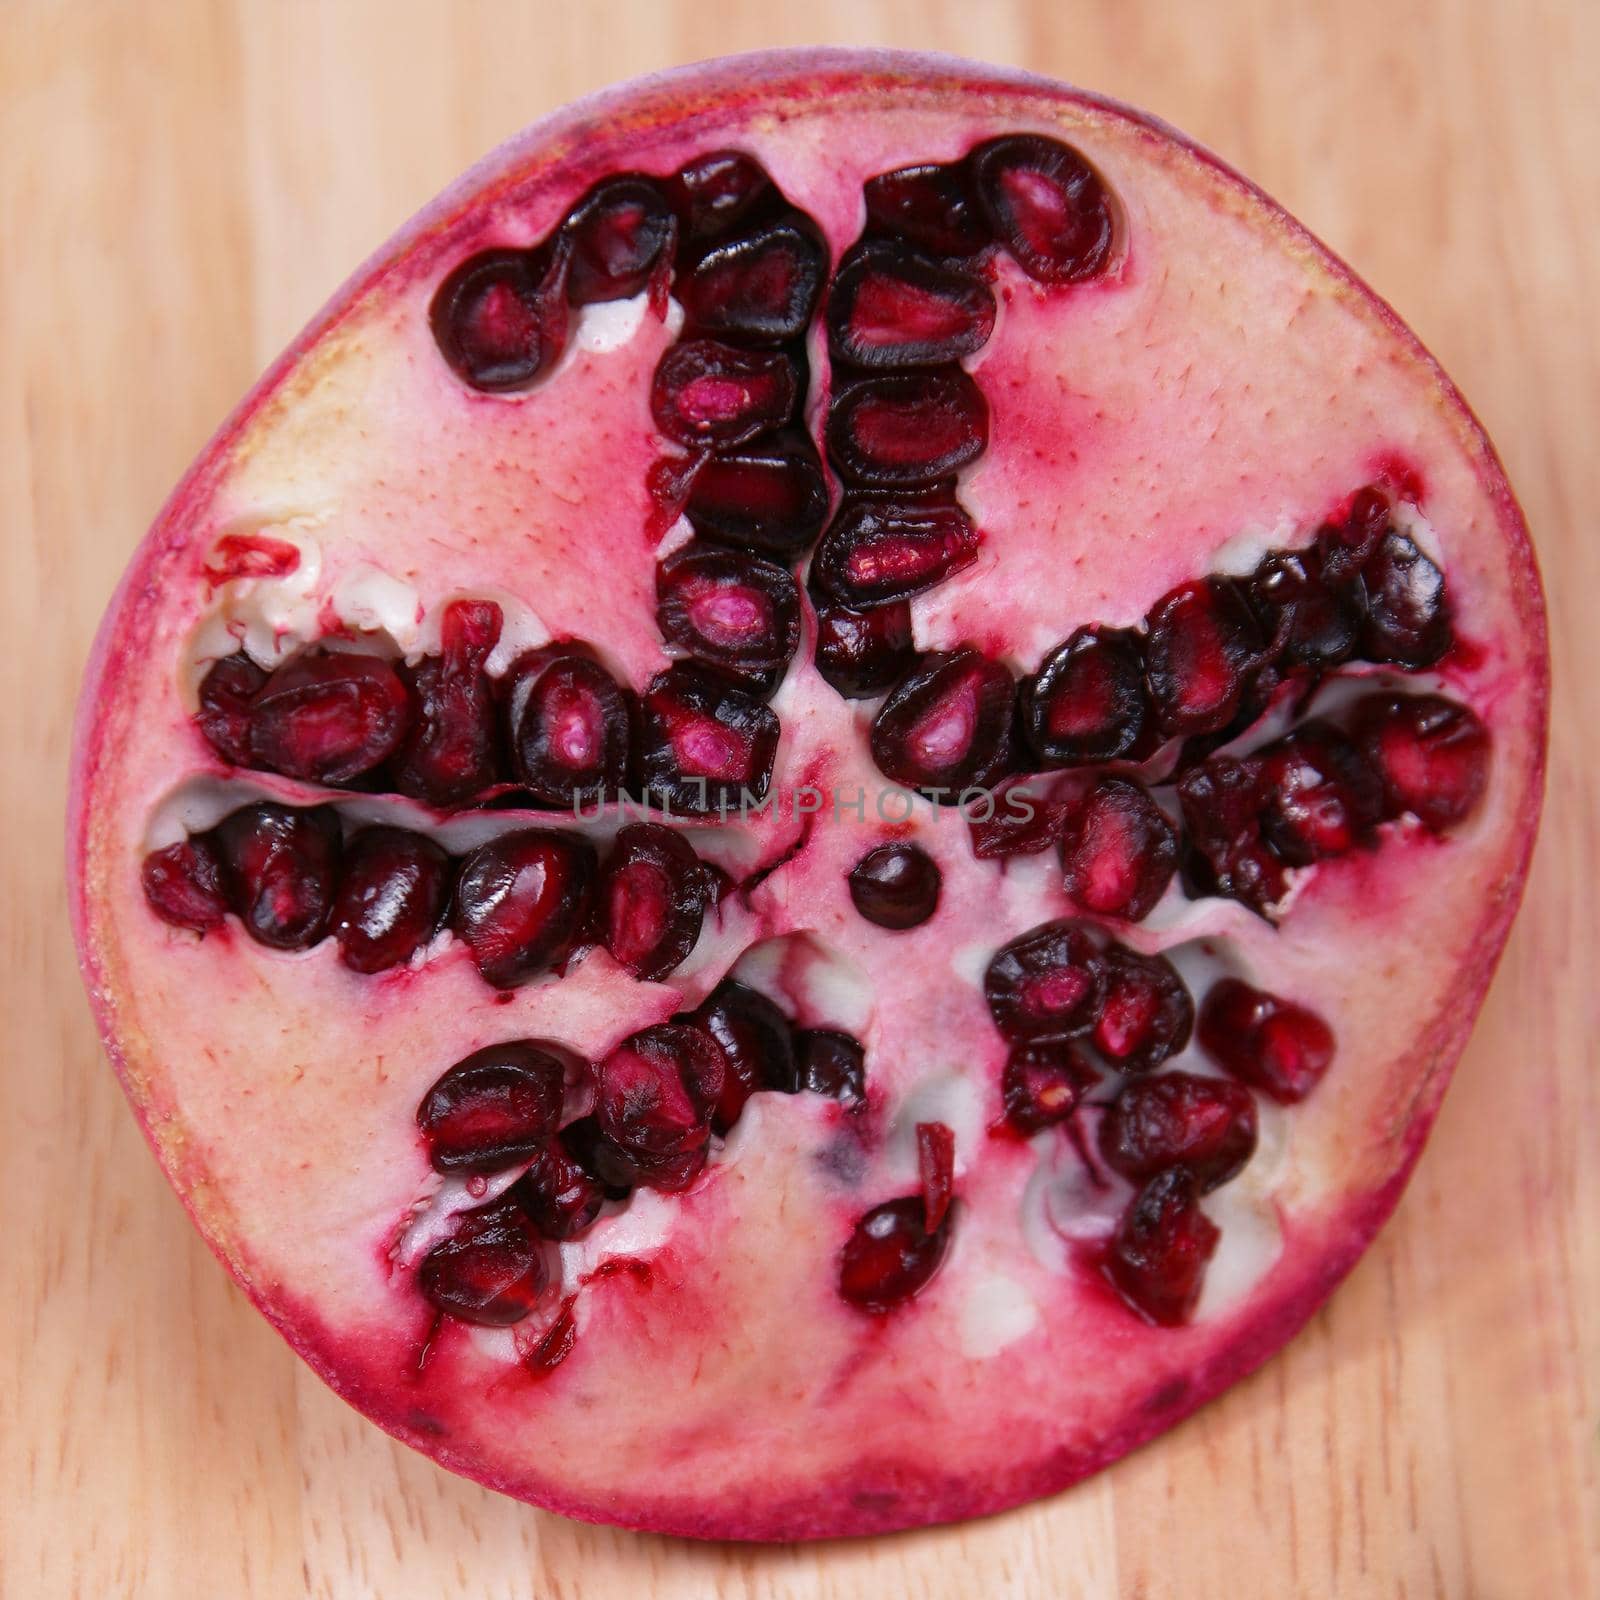 A pomegranate sliced showing seeds on a wood chopping board